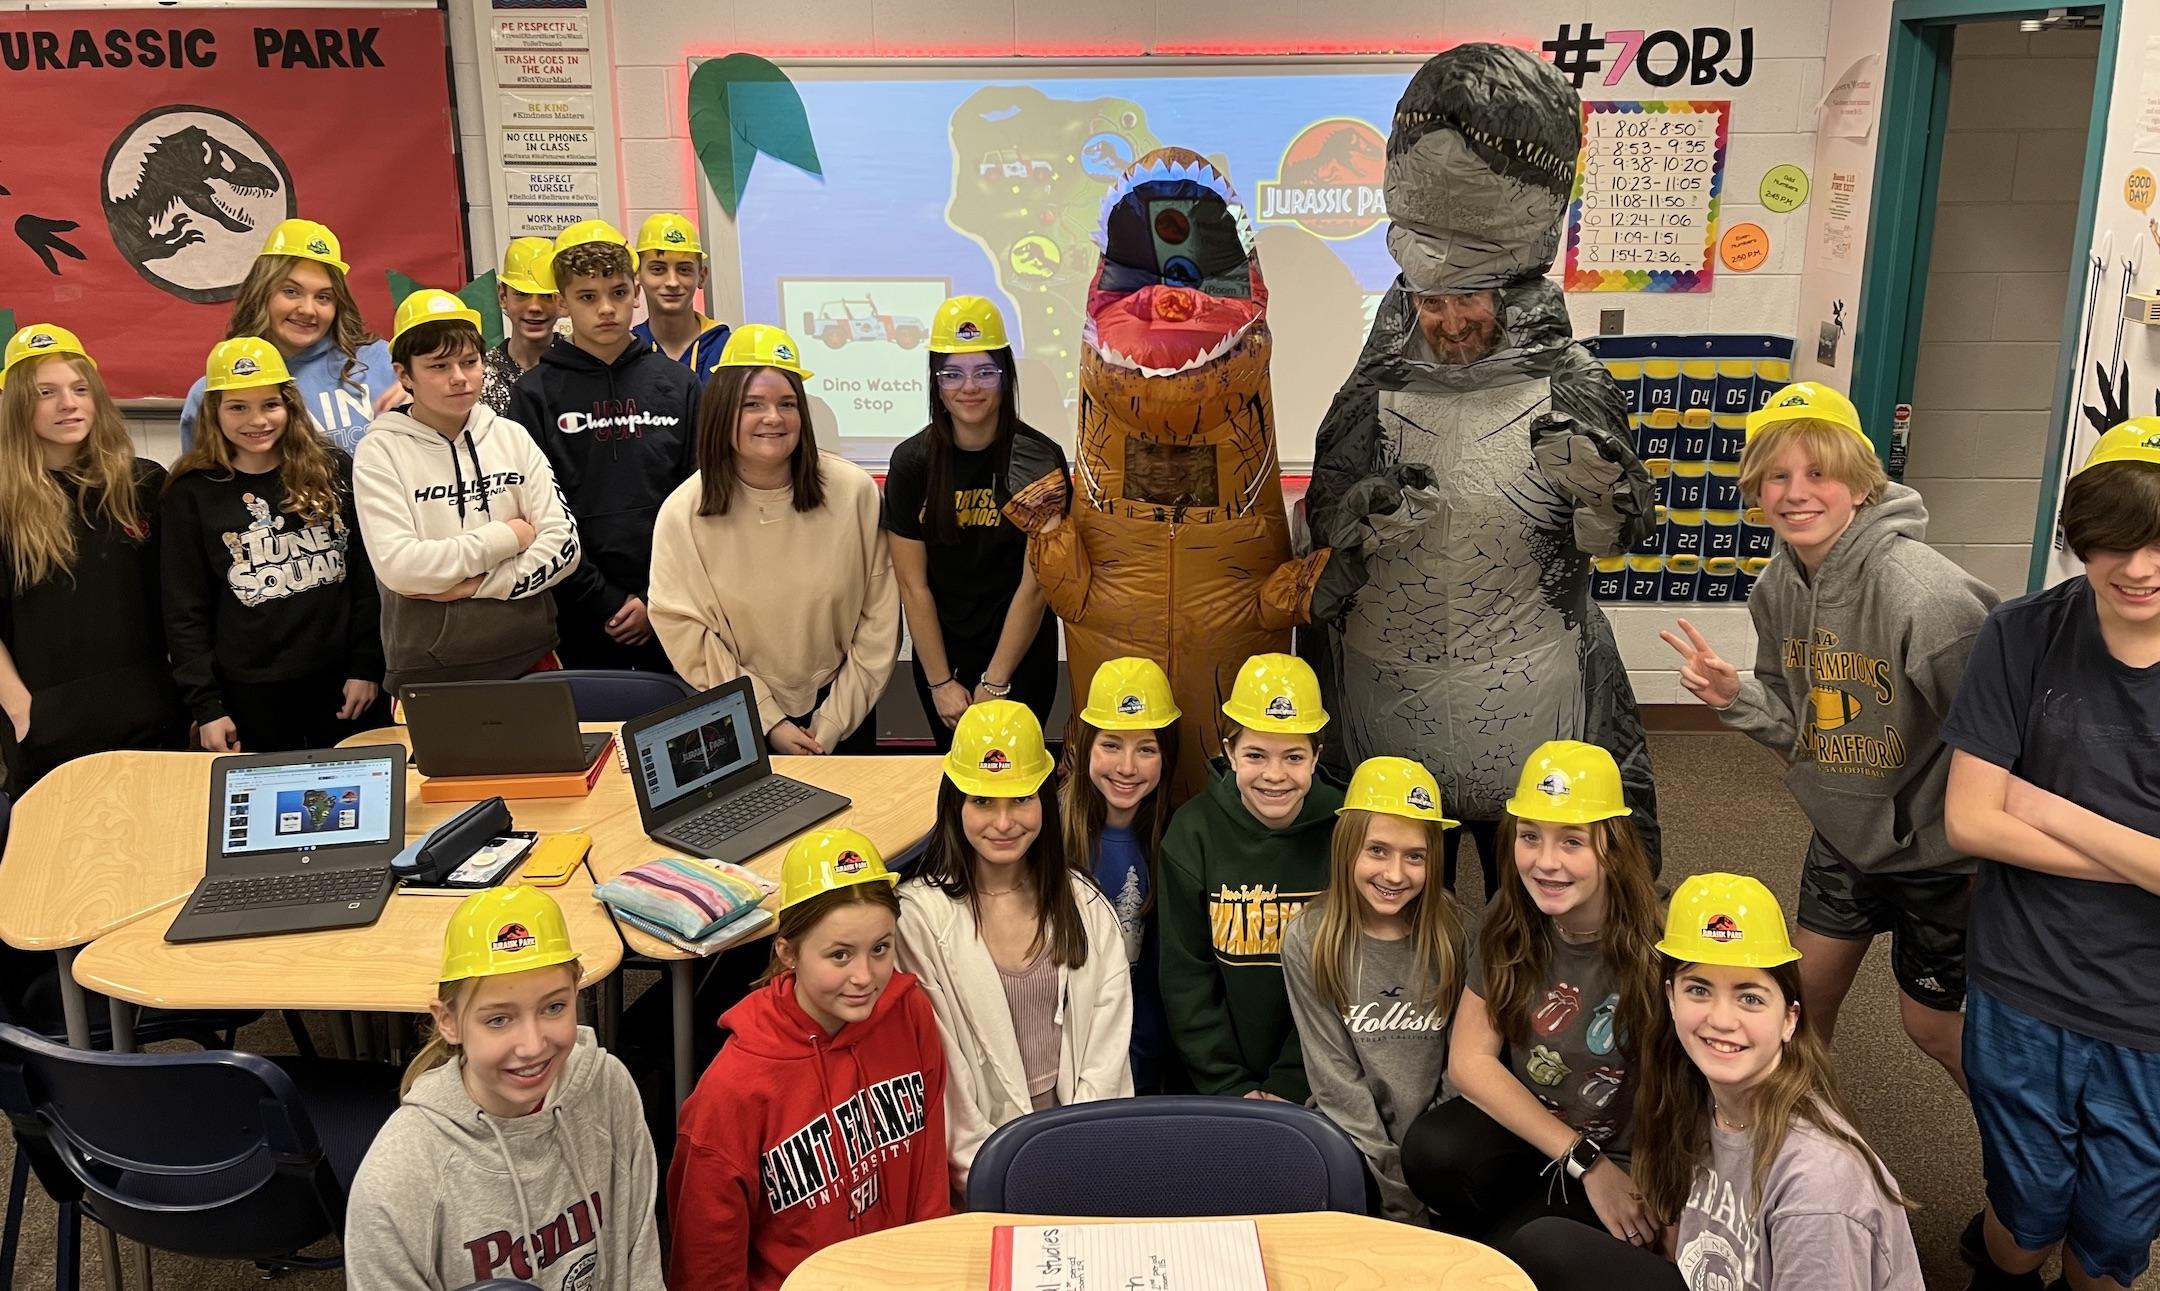 Principal Simpson (Velociraptor) joined Ruffner (T-Rex) in the Jurrasic-themed classroom